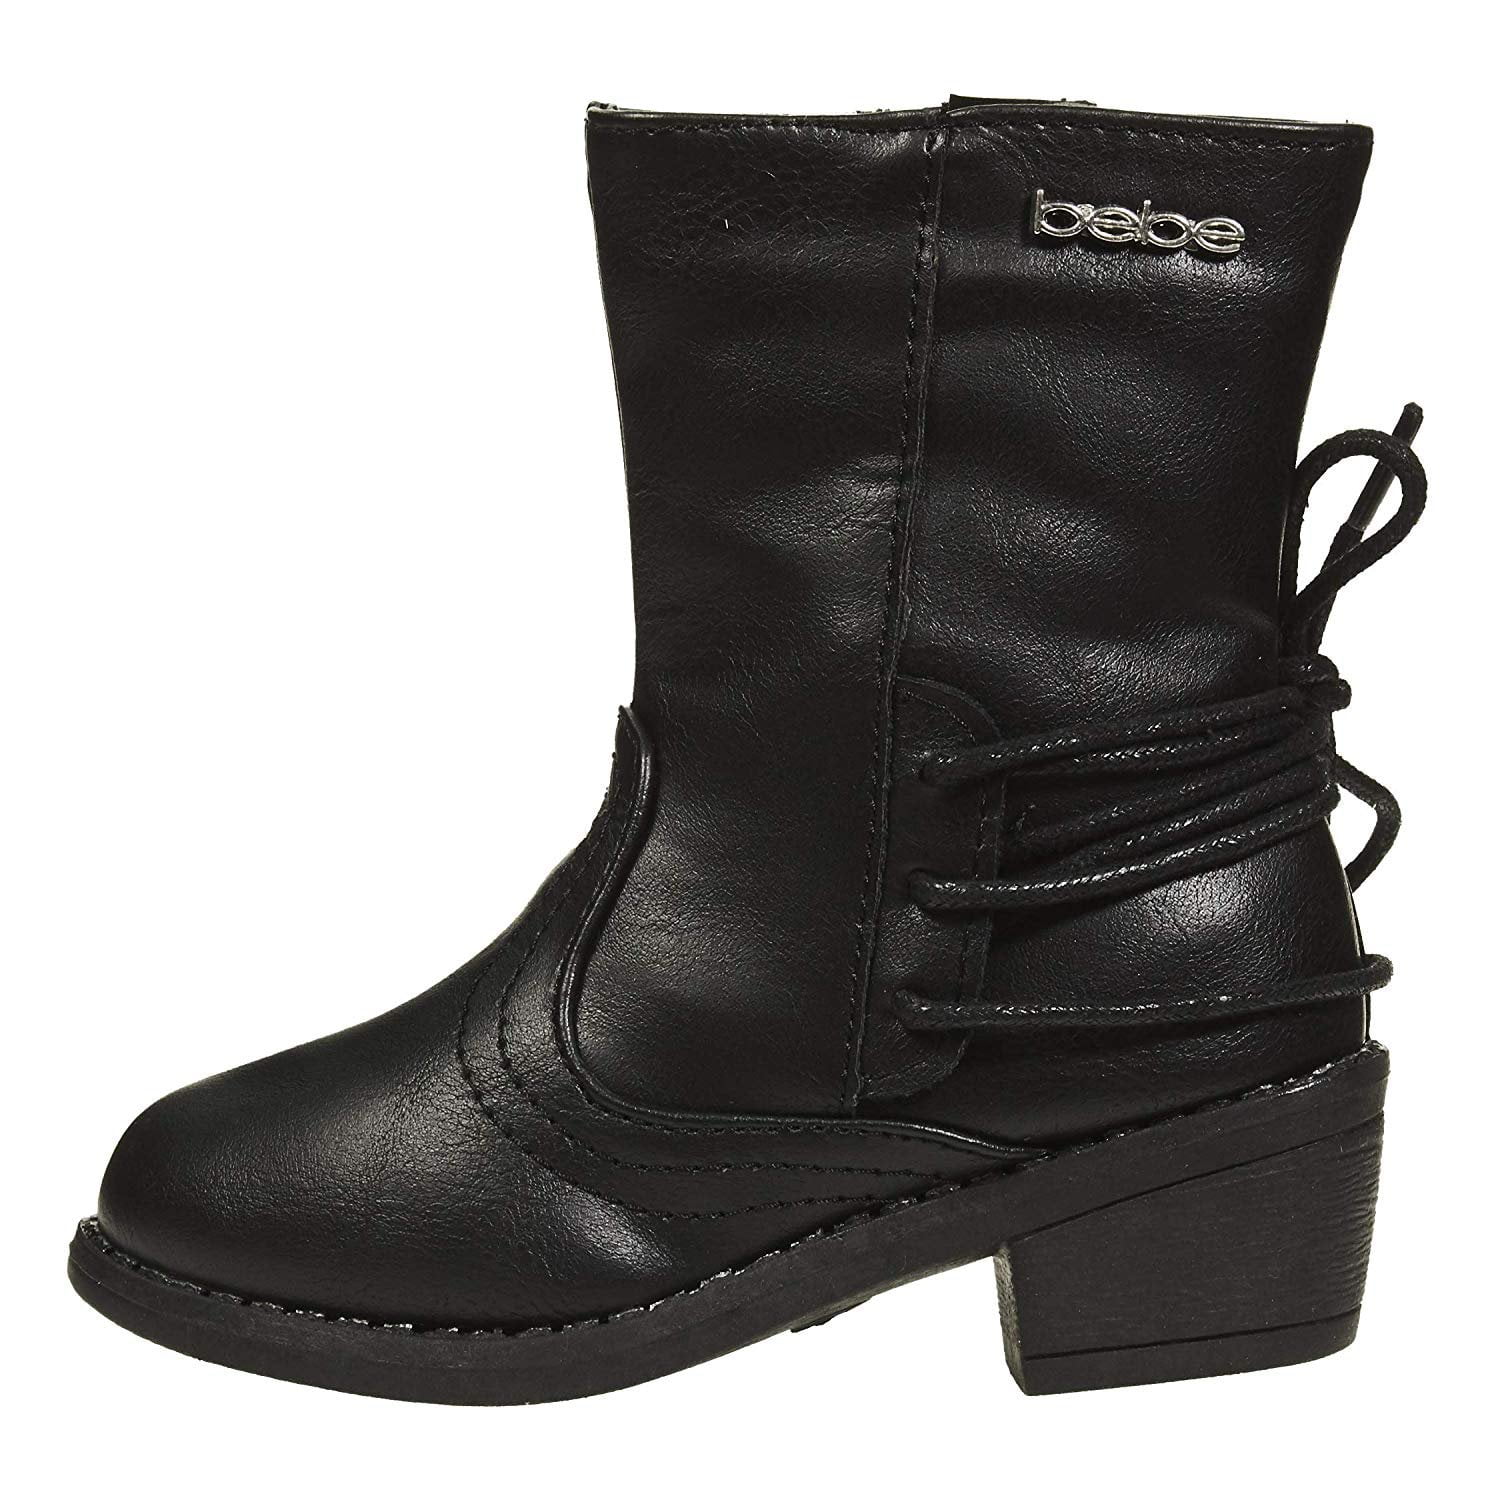 lace up boots size 5